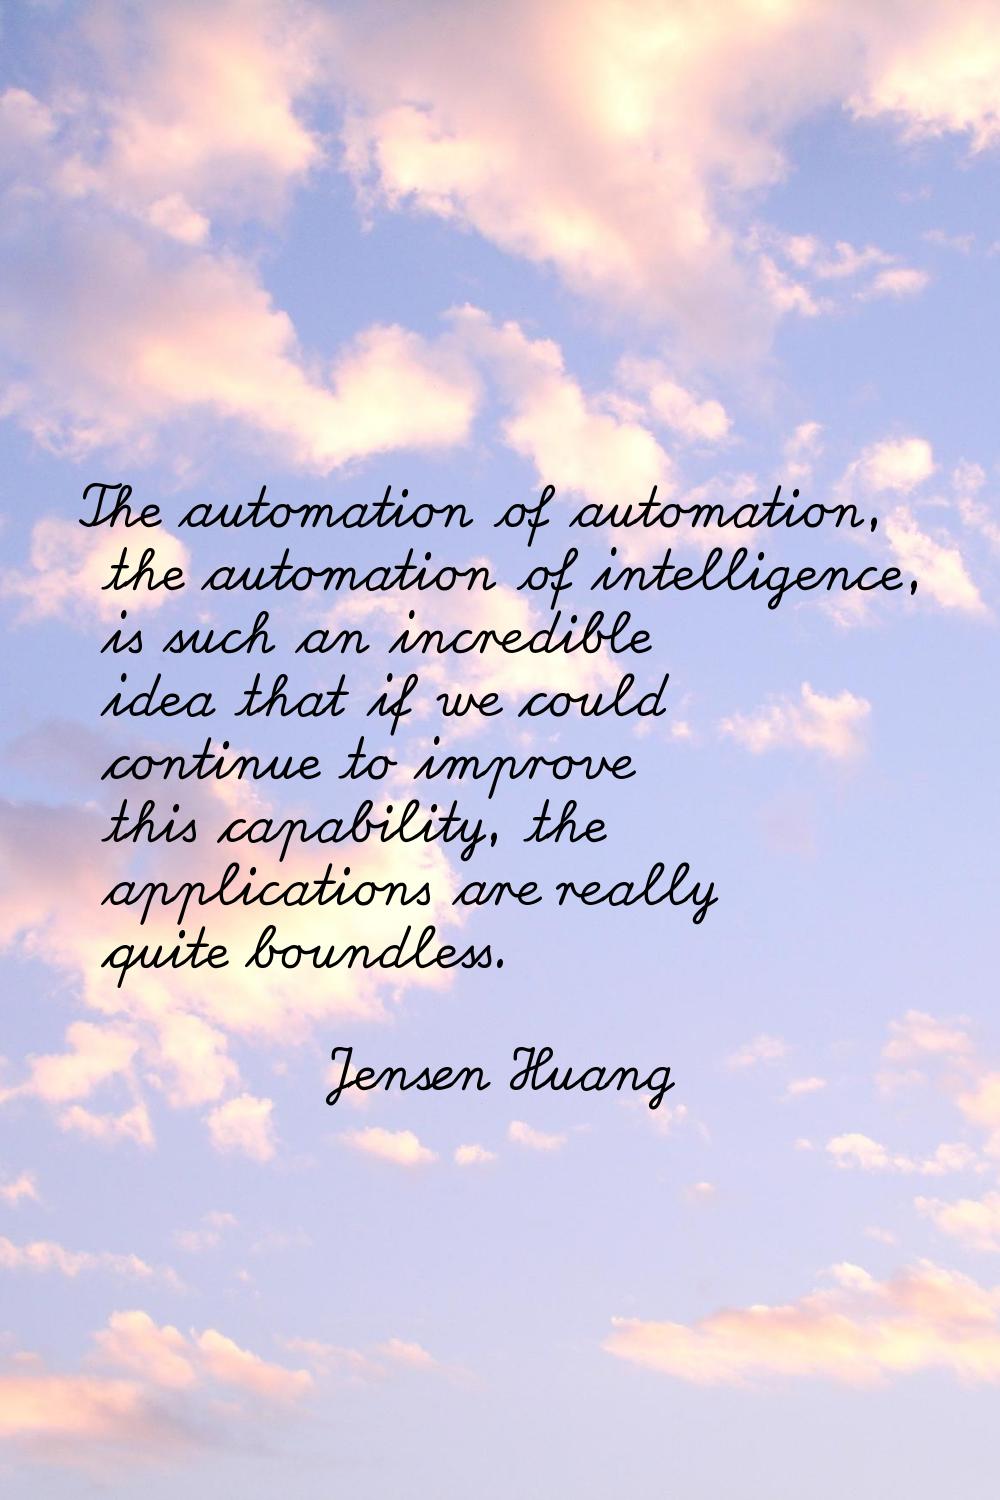 The automation of automation, the automation of intelligence, is such an incredible idea that if we